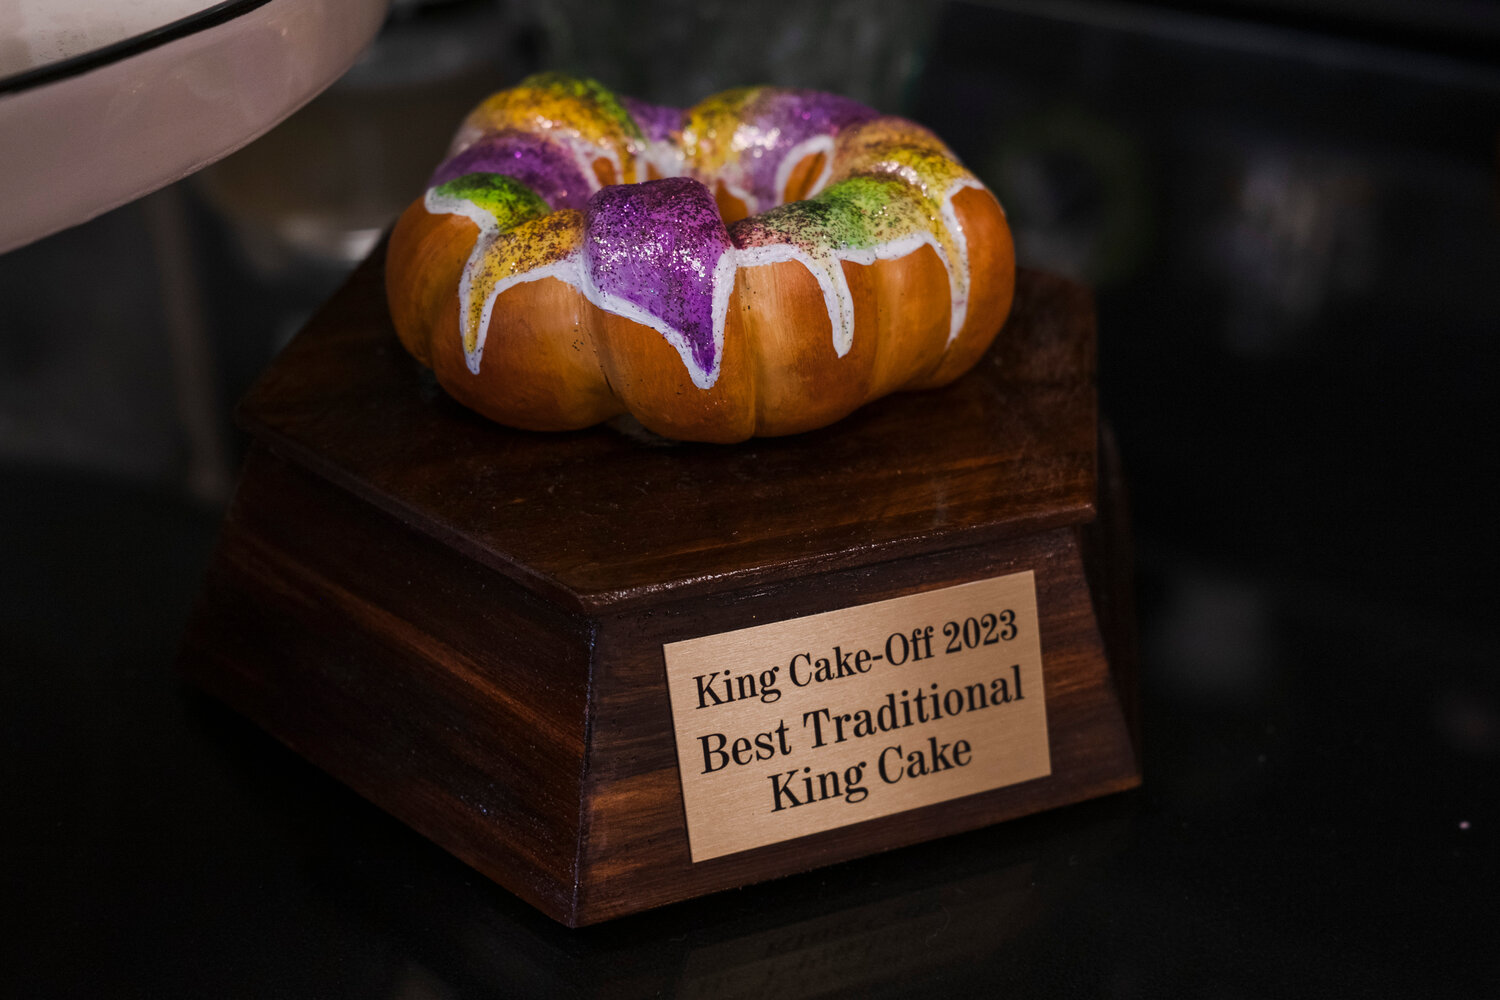 Gourmet Goodies walked away from the 2023 King Cake-Off with the first-place trophy in the traditional king cake category with their sweet heat king cake.